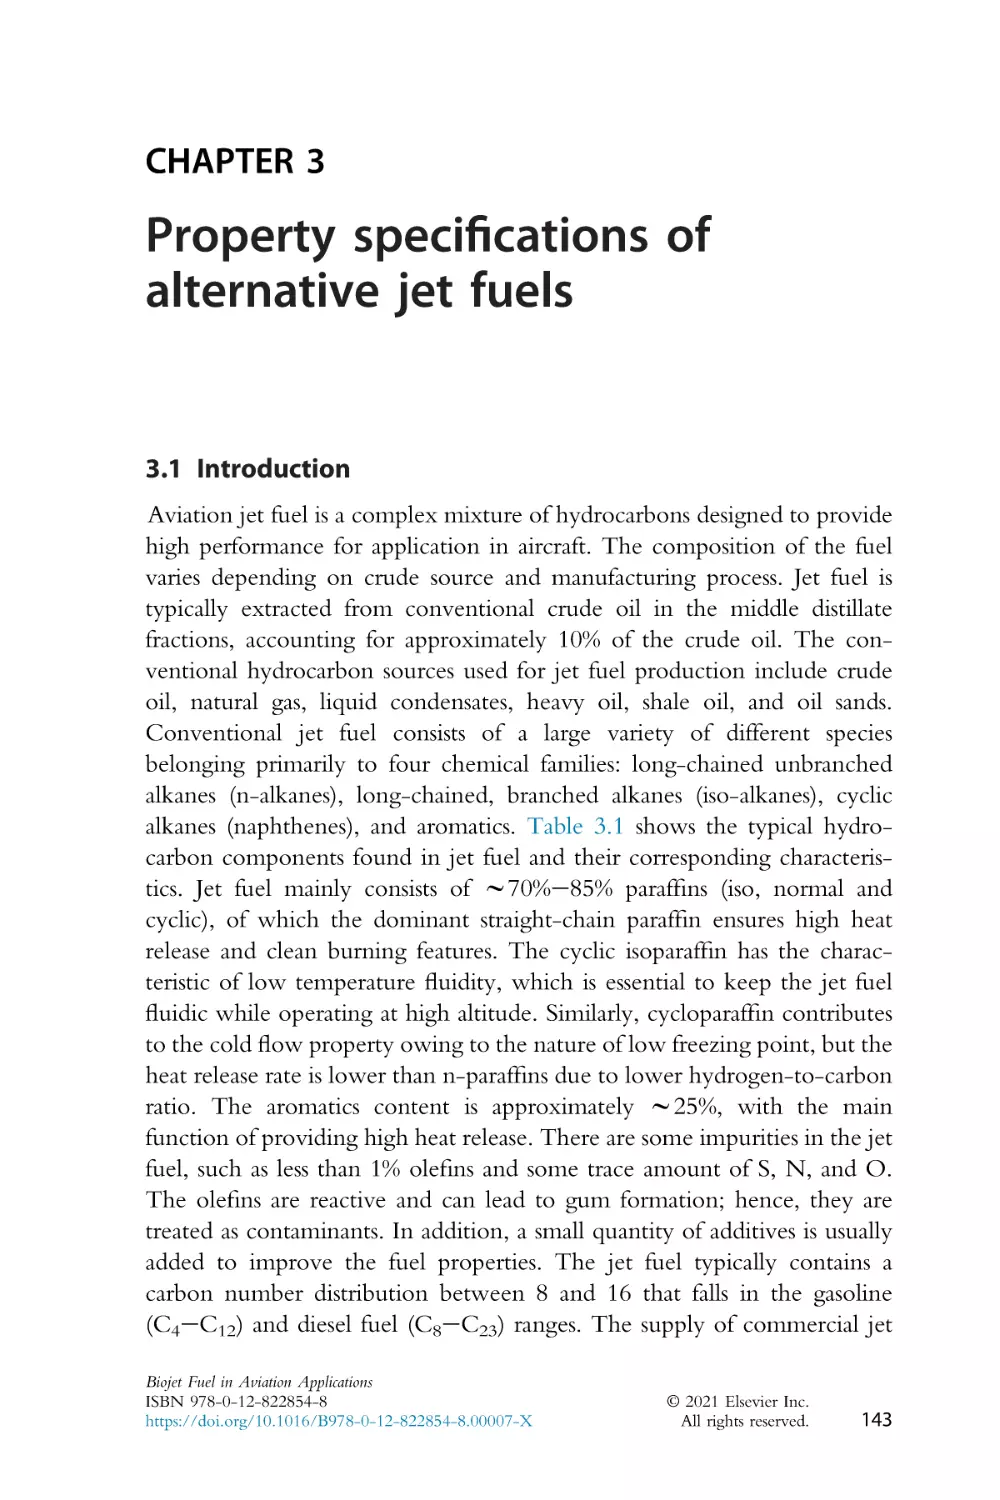 3 - Property specifications of alternative jet fuels
3.1 Introduction